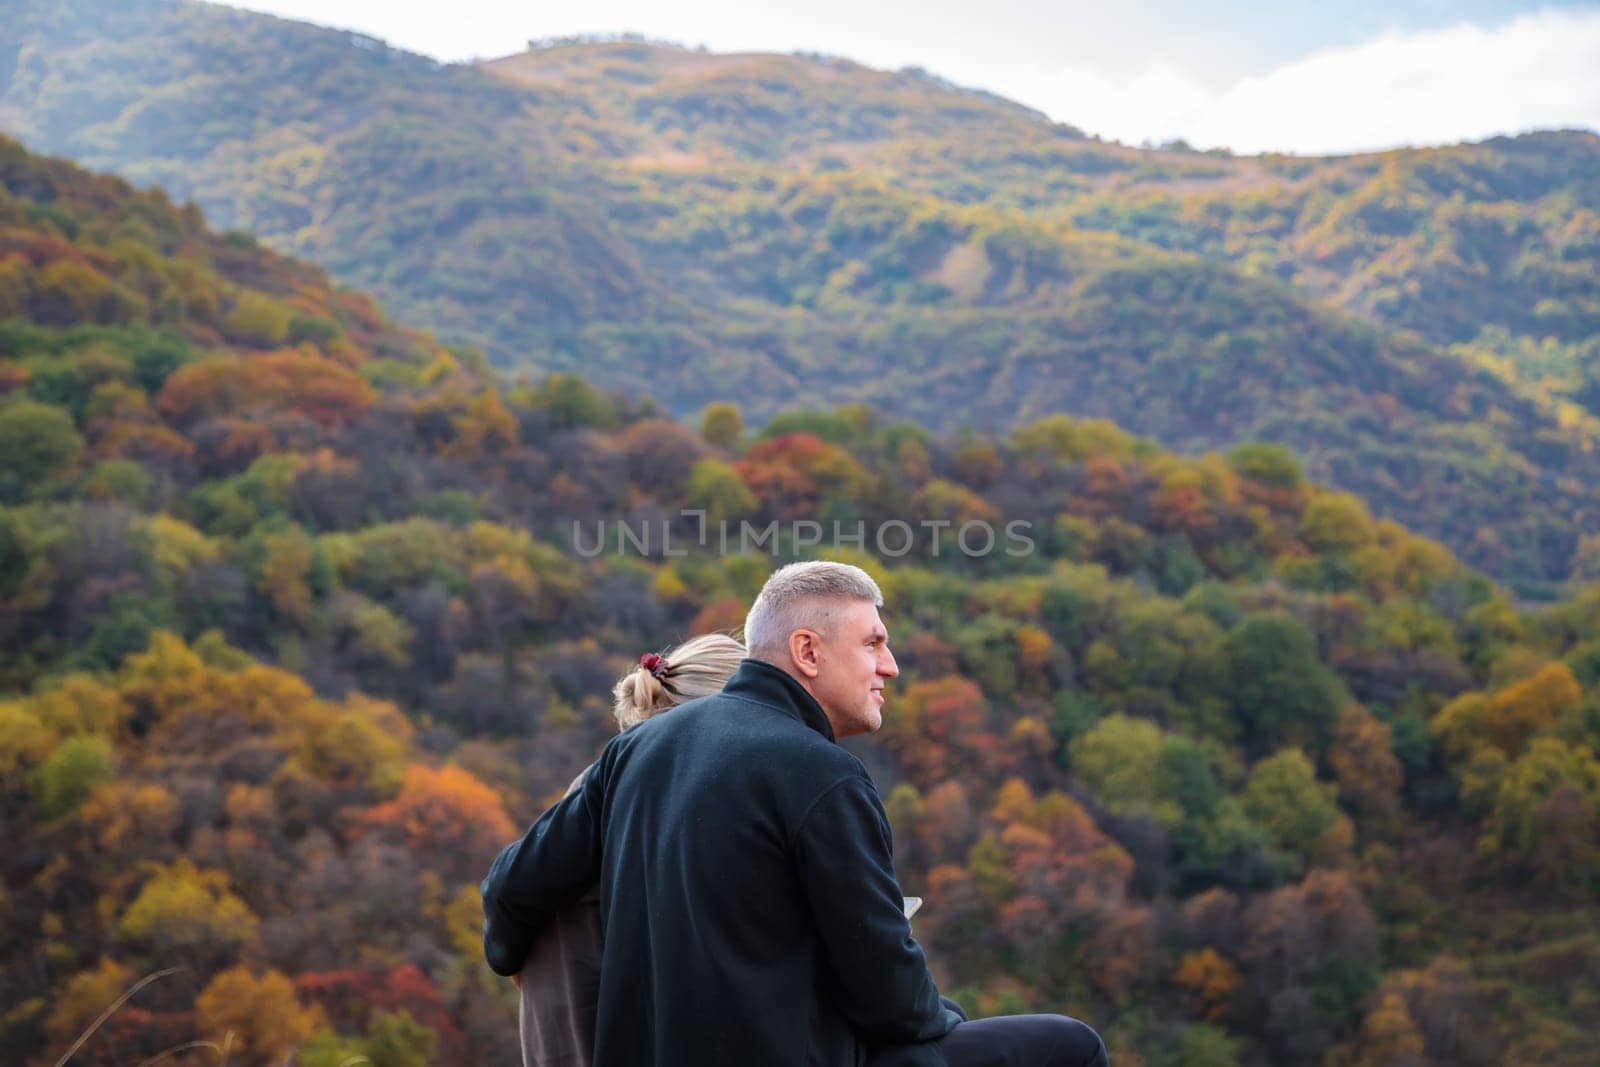 Loving couple in the mountains enjoying the scenery in their arms by Yurich32